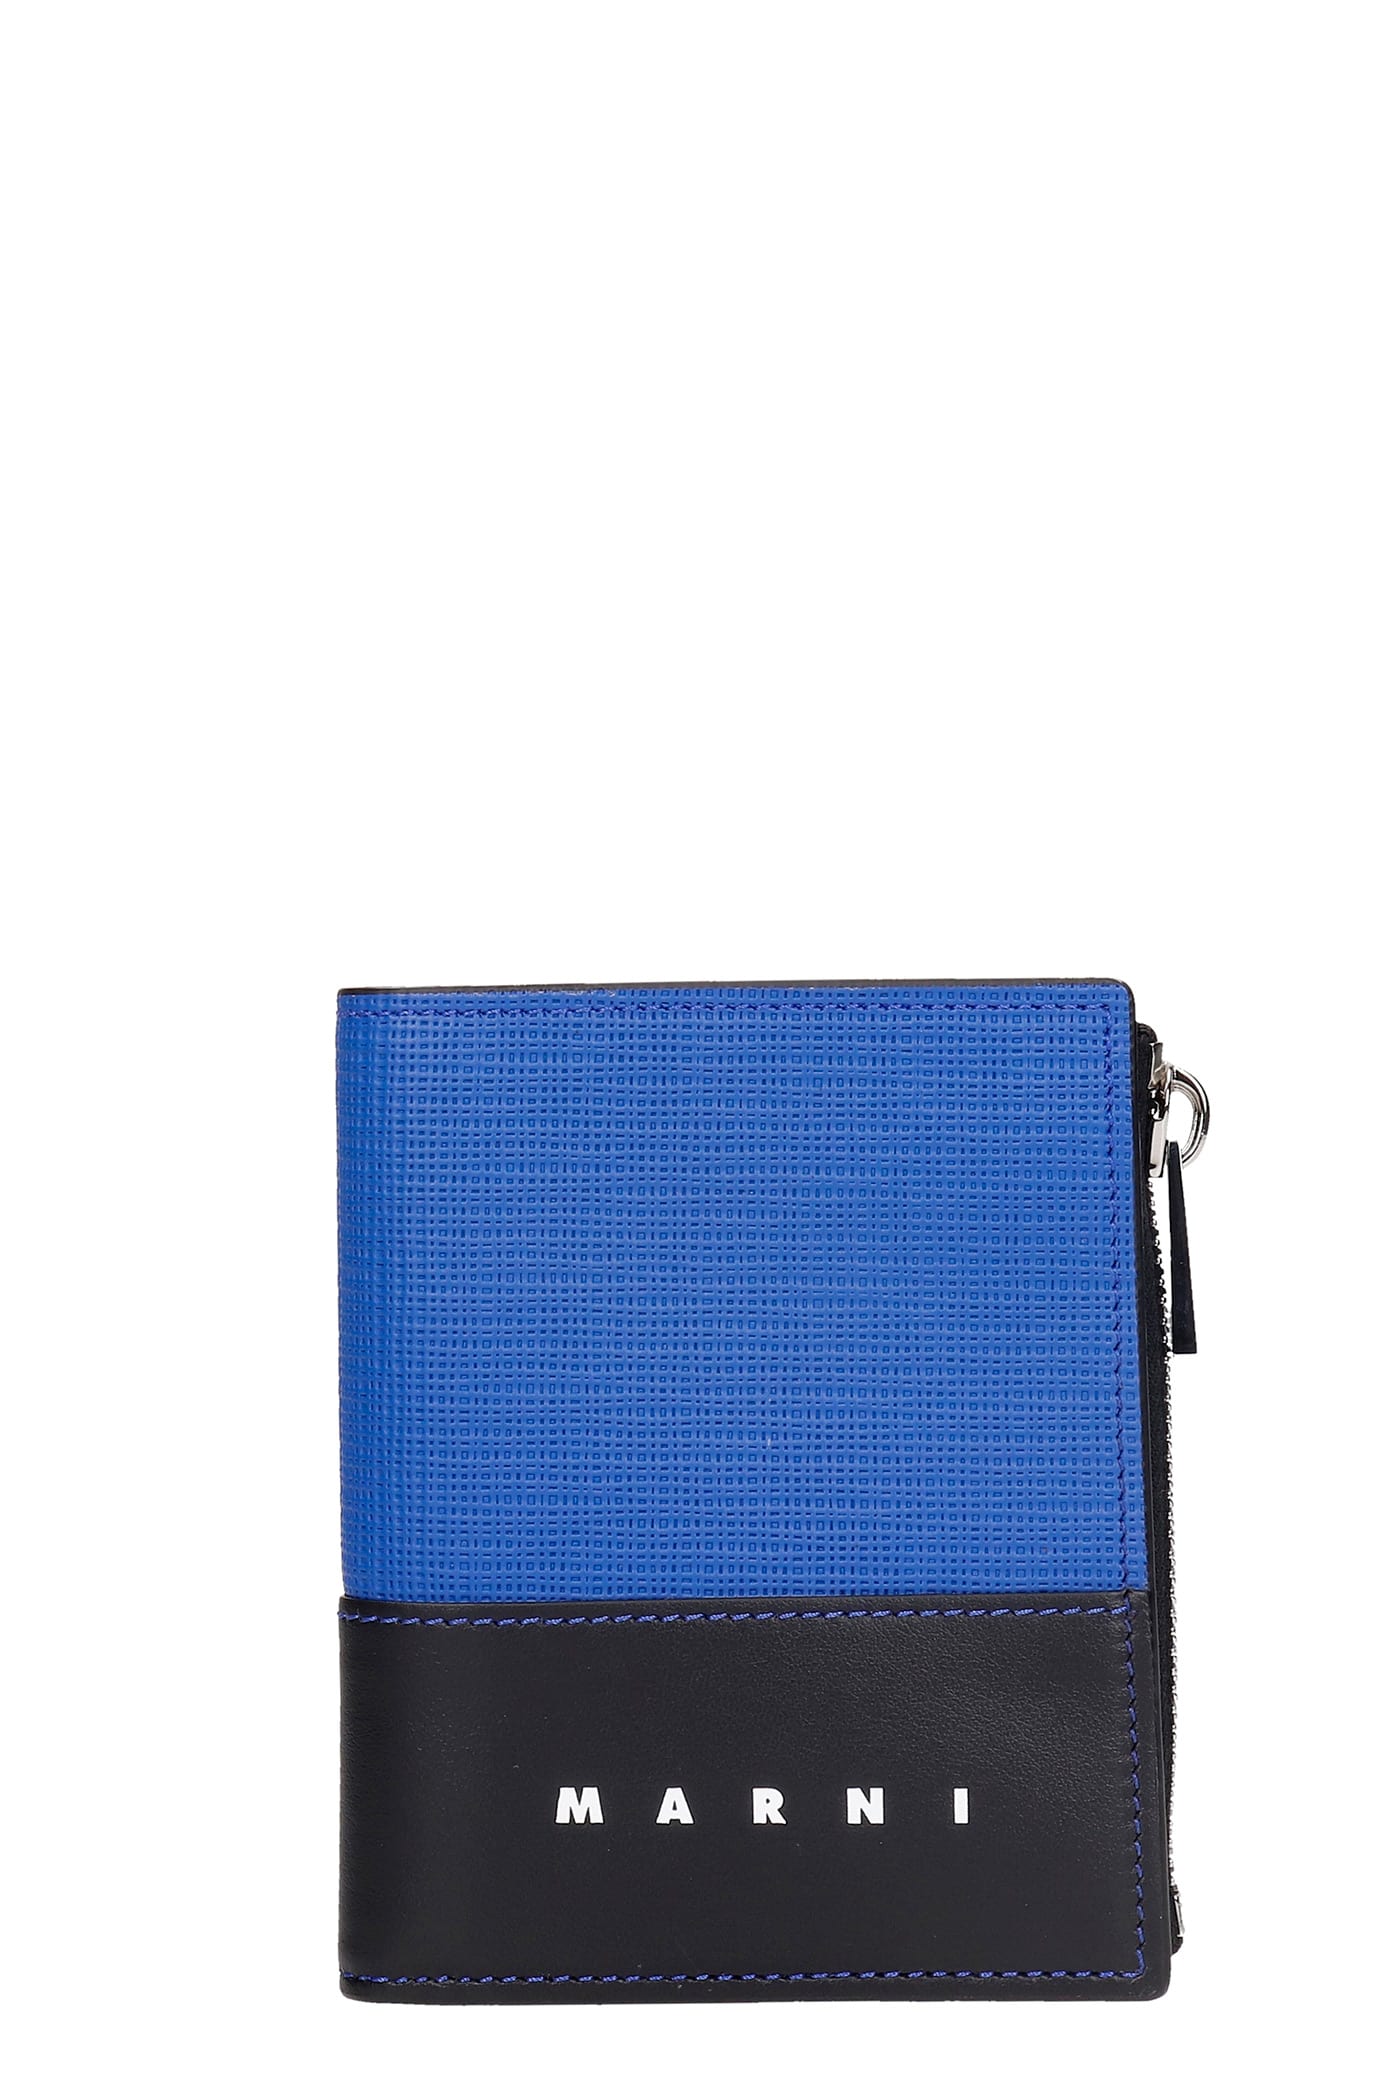 Marni Wallet In Black Leather